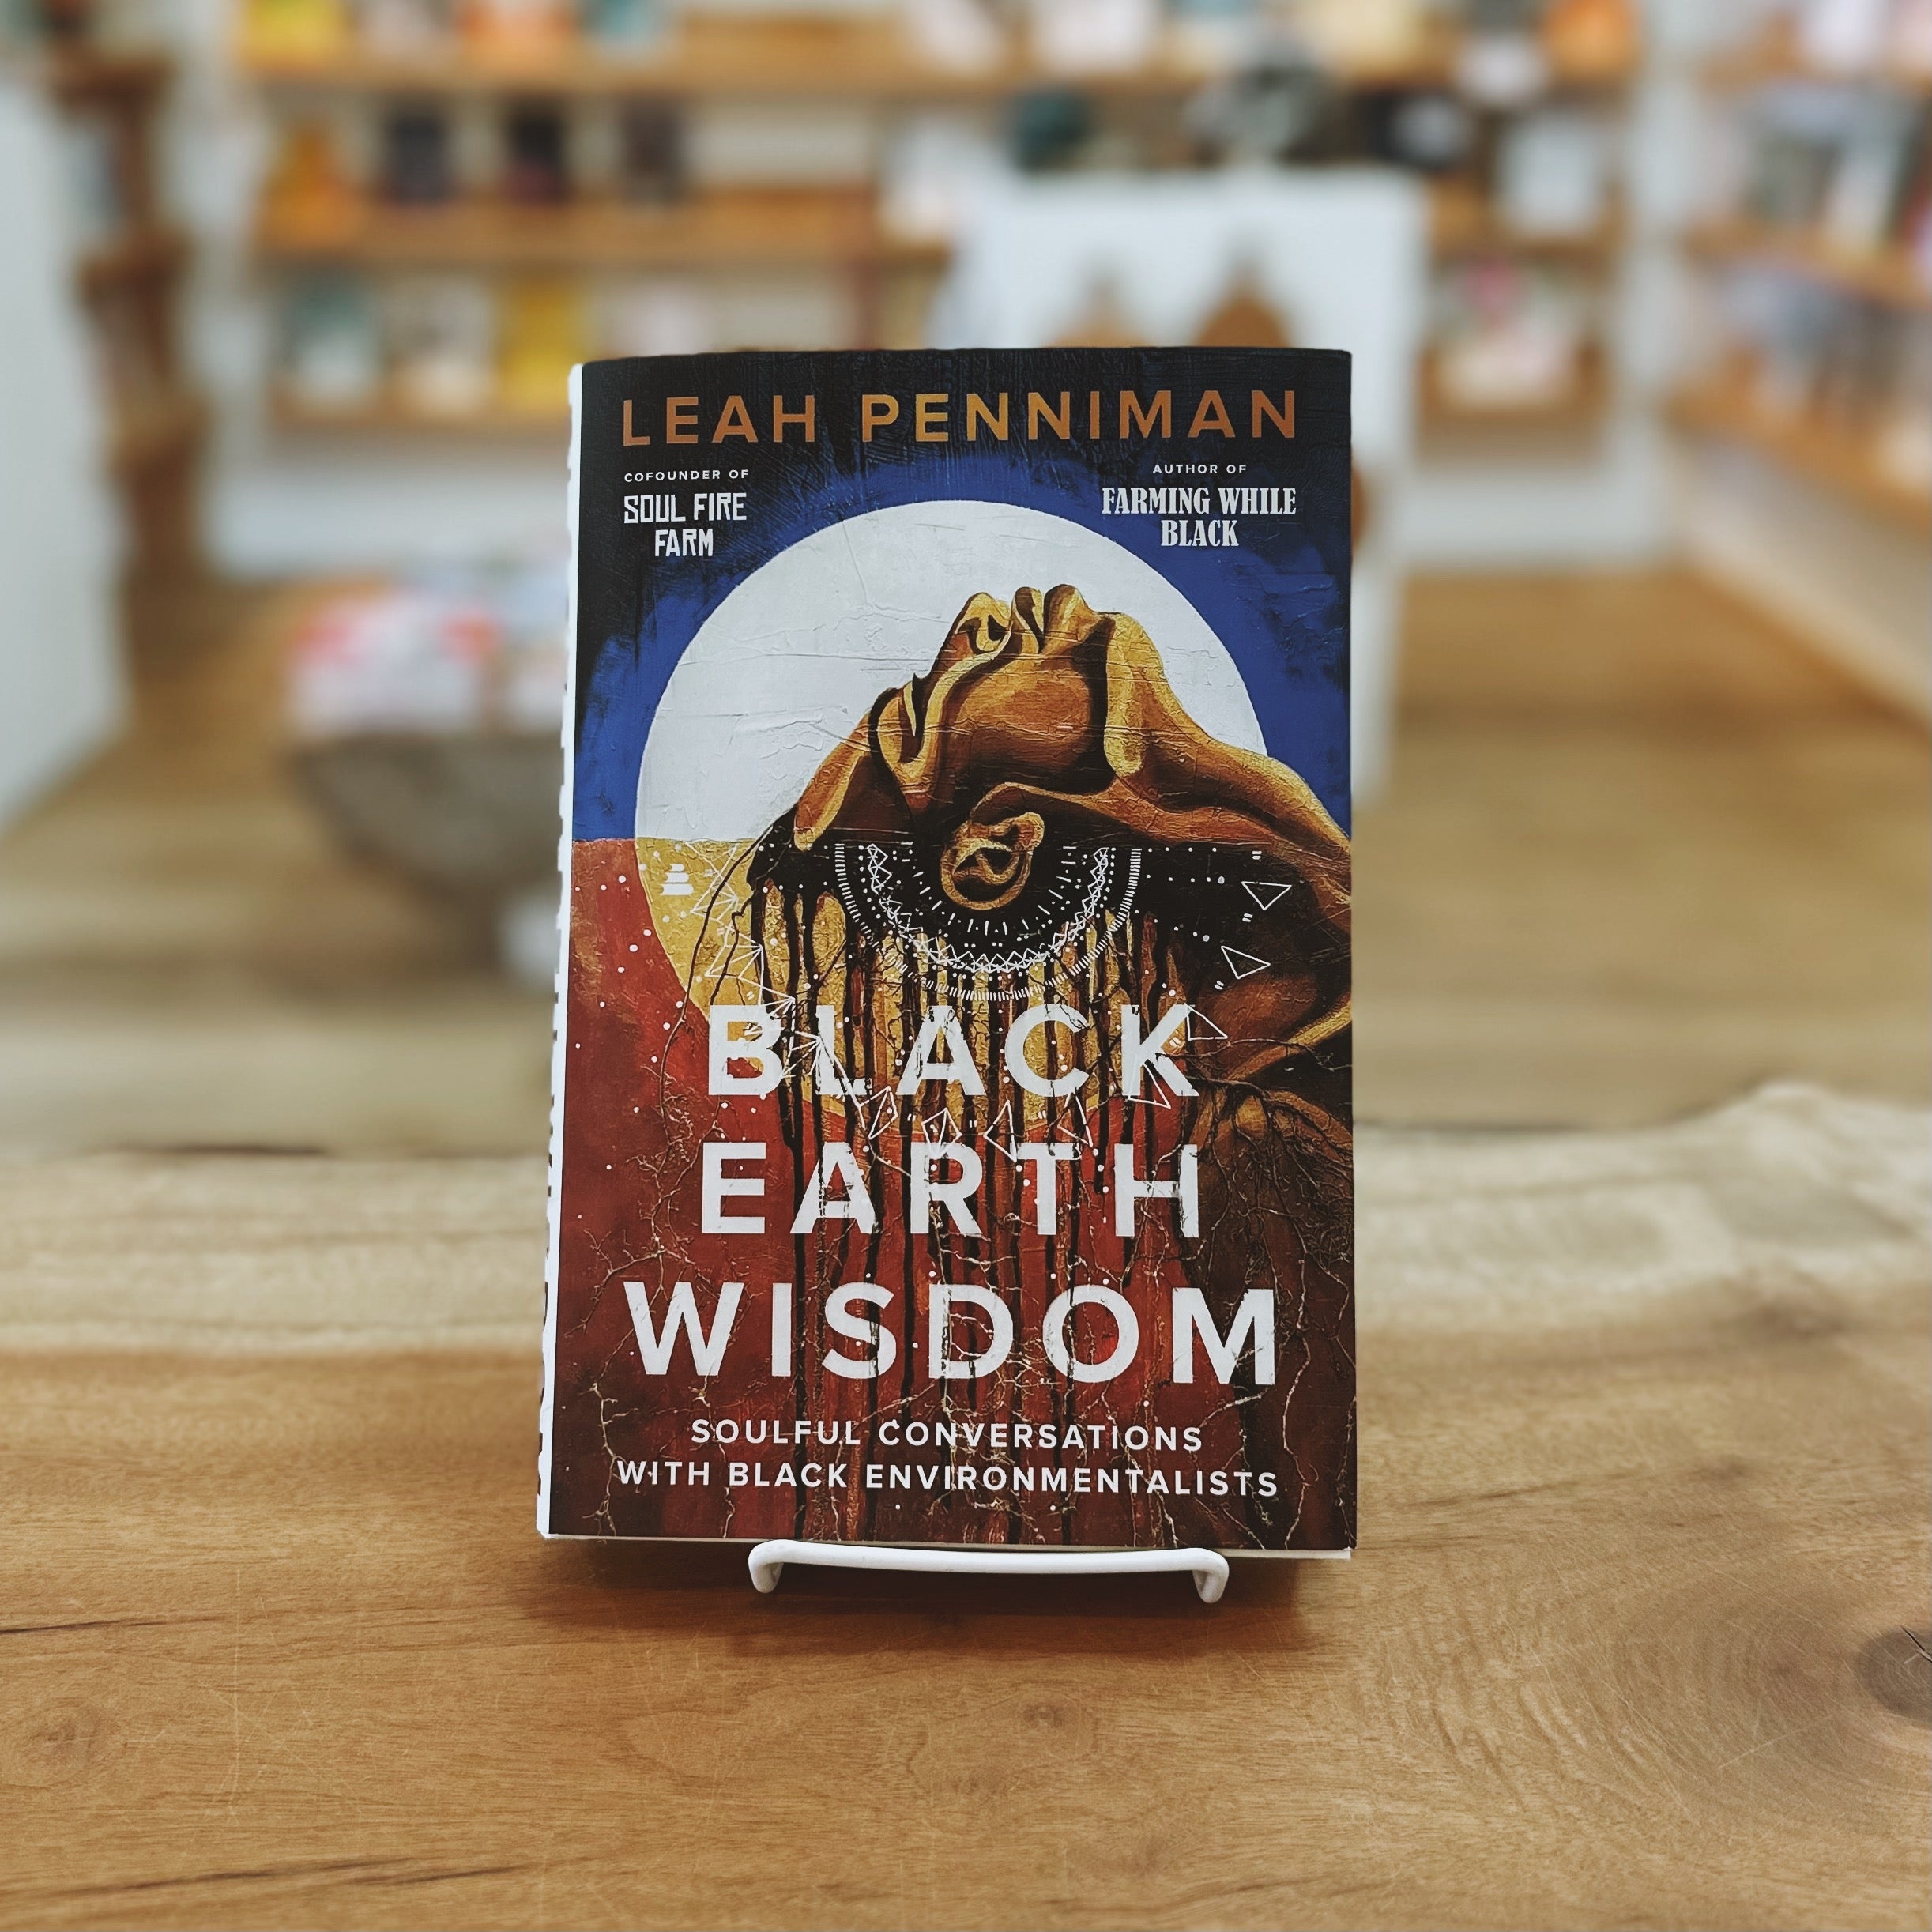 Black Earth Wisdom: Soulful Conversations with Black Environmentalists